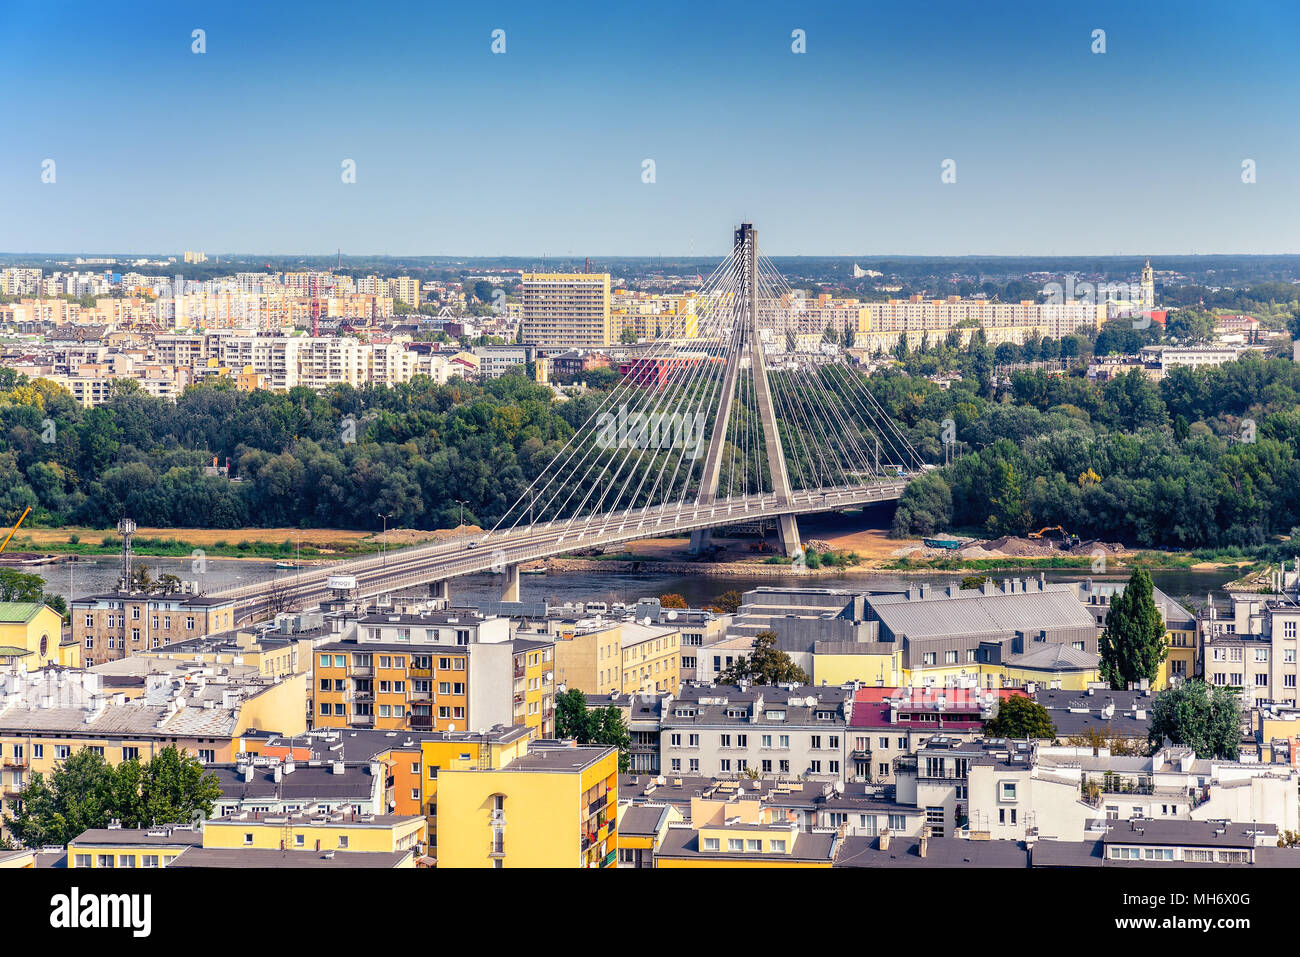 Warsaw / Poland - 09.02.2016: Aerial view on the modern architecture bridge joining two districts over Vistula river. Stock Photo